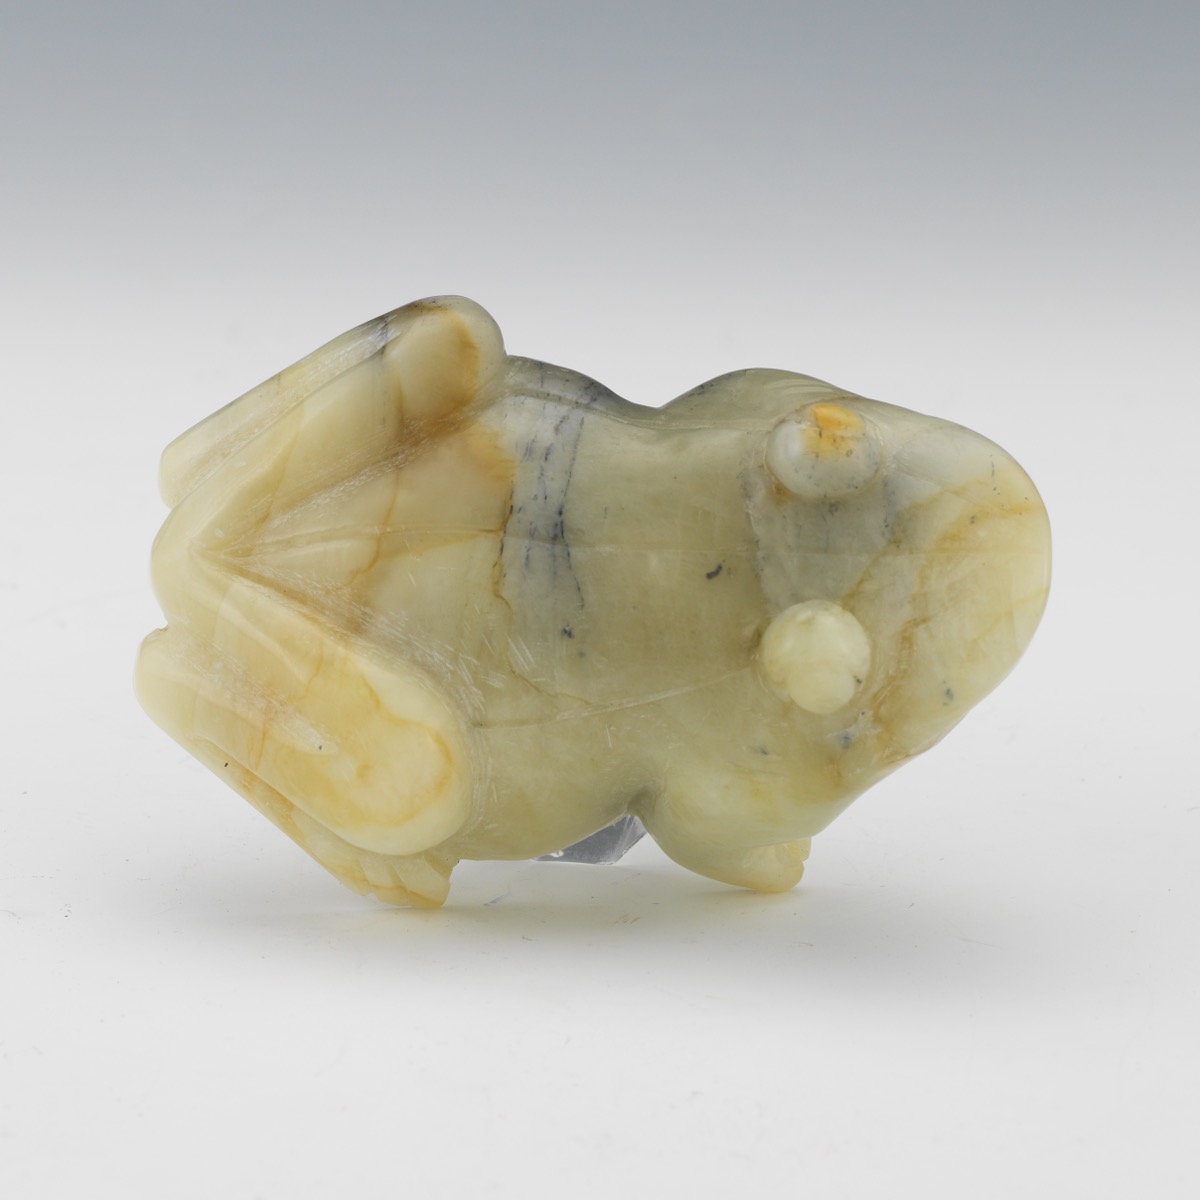 Chinese Carved Agate and Carnelian Lucky Frog Cabinet Sculpture, in Presentation Box - Image 6 of 8